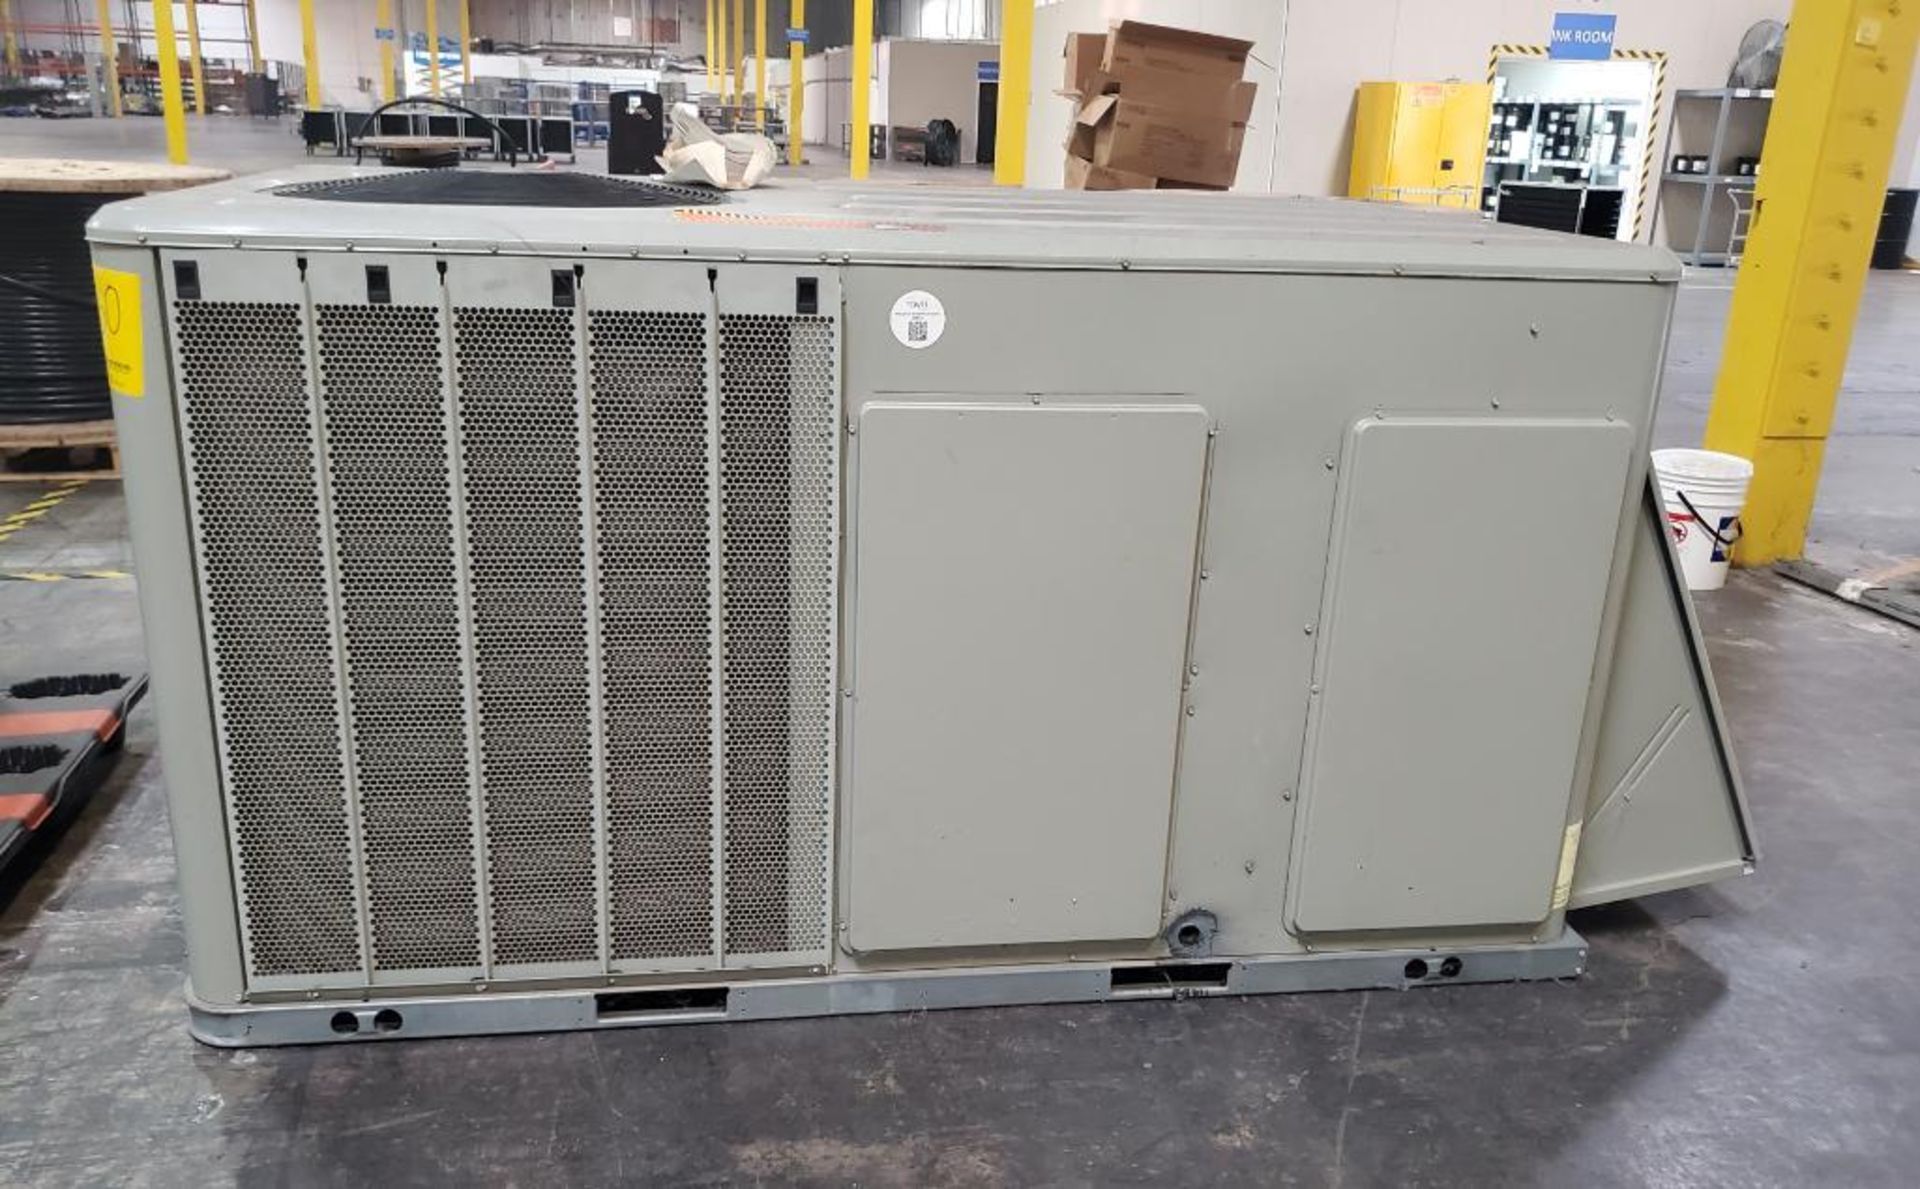 TRANE ROOFTOP AIR CONDITIONER; MODEL TSC120P4RDA03A001000000000, S/N 130911419L